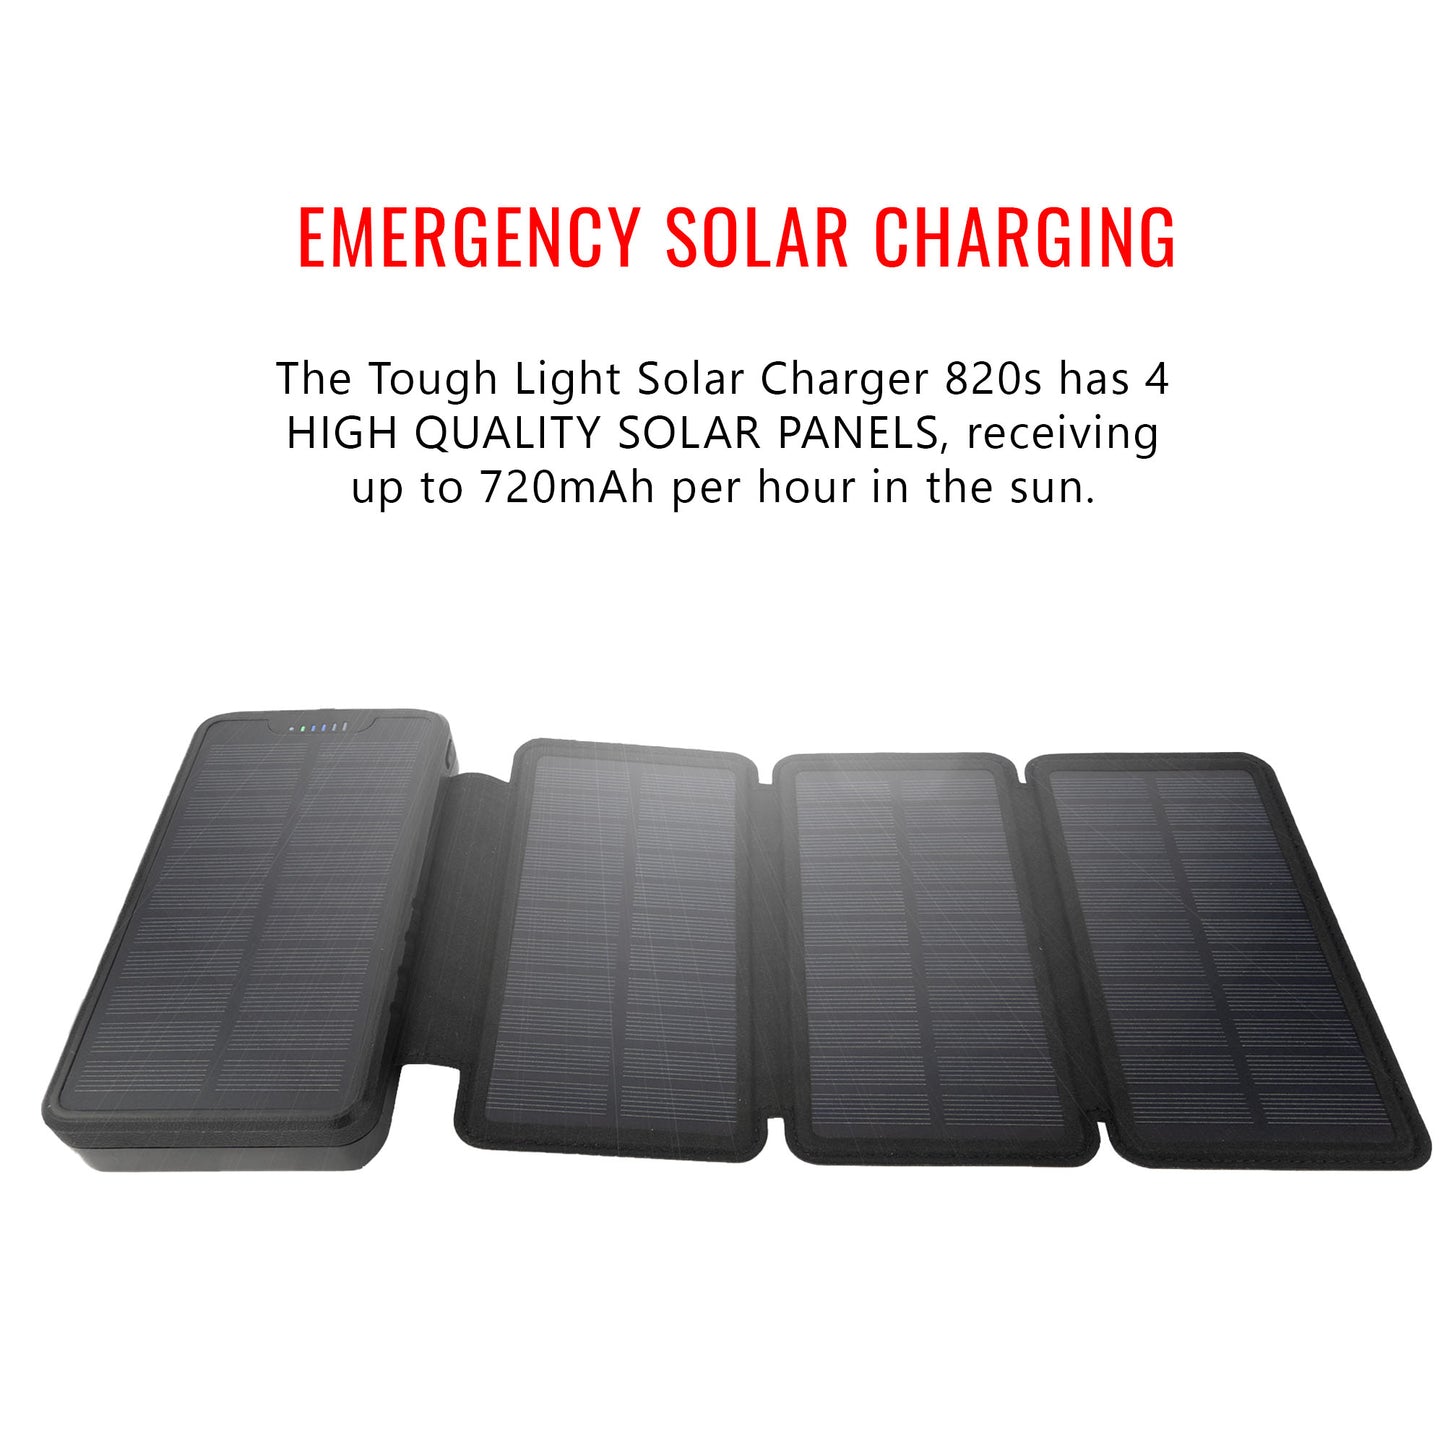 [ Bulk Pack of 10 ] Tough Light 820S 4 Panel USB Solar Power Bank Charger - 20,000mAh Li Polymer with USB Phone Charging - 2AMP High Speed Cable Included